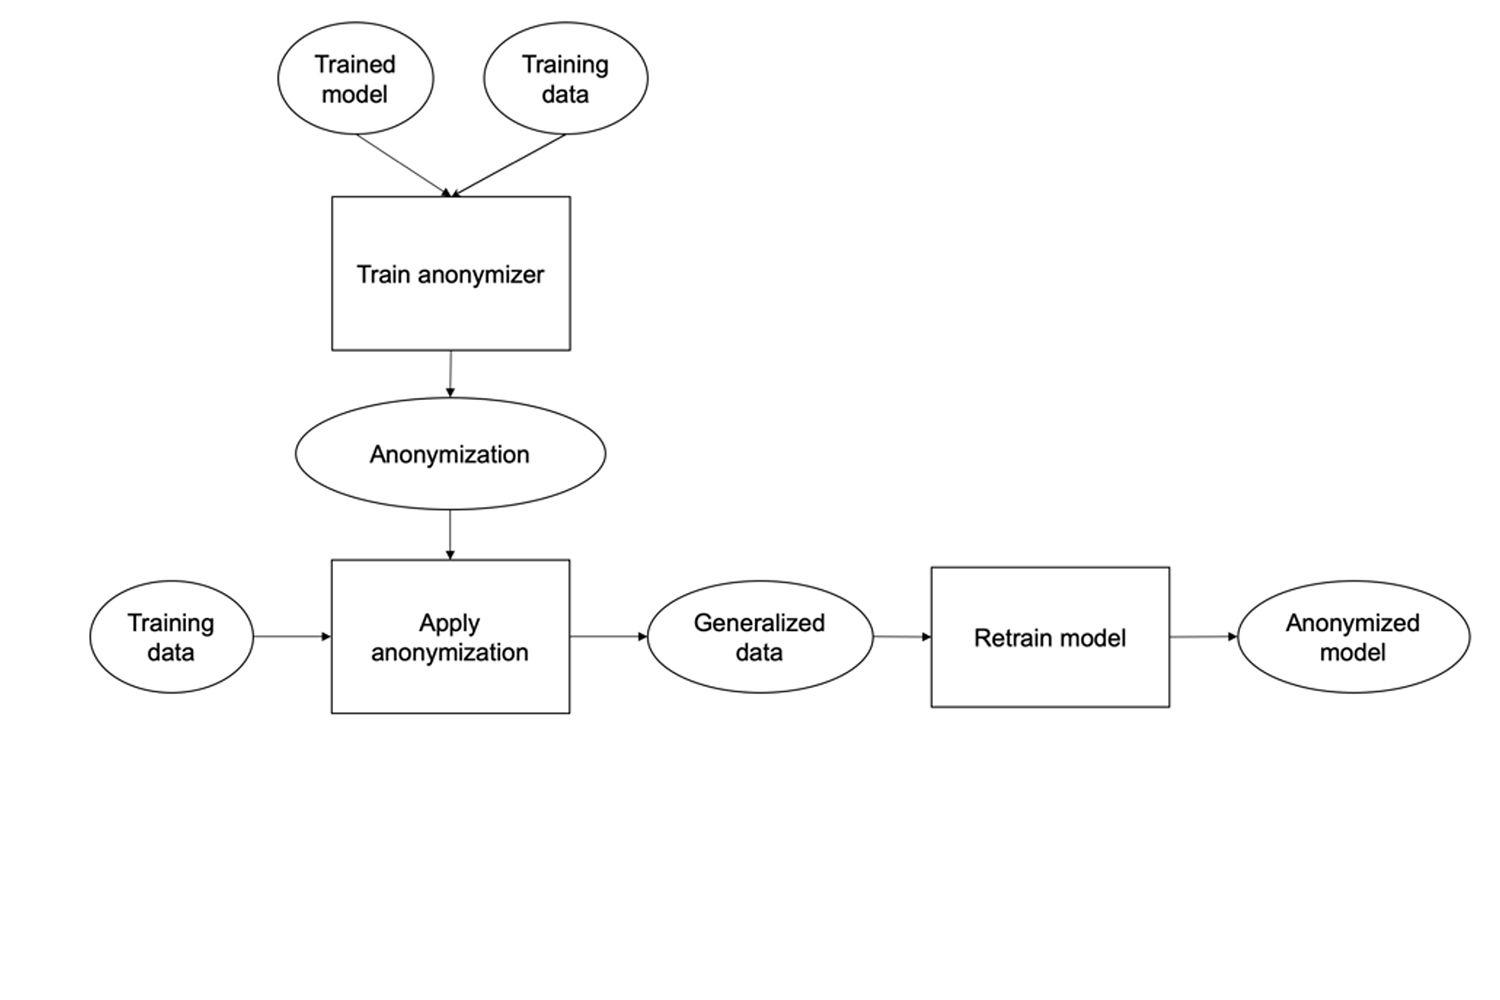 The overall model-guided anonymization process